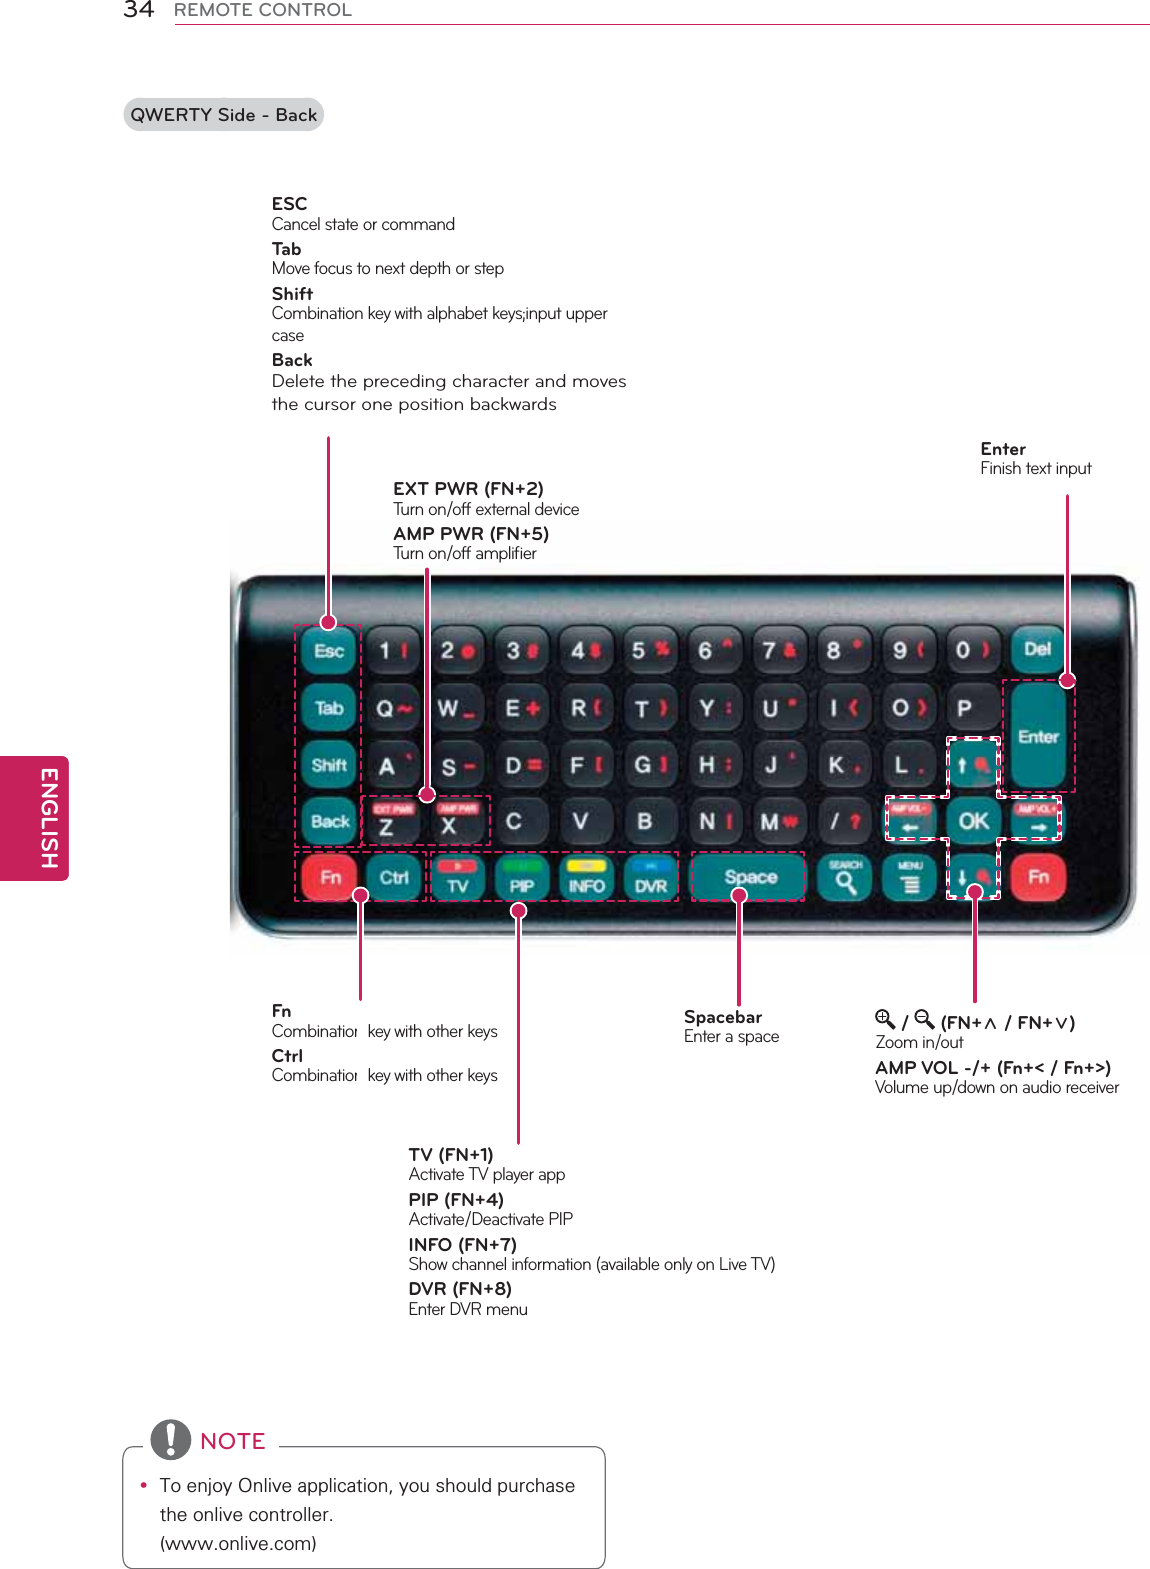 34ENGENGLISHREMOTE CONTROLQWERTY Side - BackEXT PWR (FN+2)Turn on/off external deviceAMP PWR (FN+5)Turn on/off ampliﬁerFnCombination key with other keysCtrlCombination key with other keysSpacebarEnter a space /   (FN+ن / FN+ه)Zoom in/outAMP VOL -/+ (Fn+&lt; / Fn+&gt;)Volume up/down on audio receiverEnterFinish text inputTV (FN+1)Activate TV player appPIP (FN+4)Activate/Deactivate PIPINFO (FN+7)Show channel information (available only on Live TV)DVR (FN+8)Enter DVR menuESCCancel state or commandTa bMove focus to next depth or stepShiftCombination key with alphabet keys;input upper caseBackDelete the preceding character and moves the cursor one position backwardsy To enjoy Onlive application, you should purchase the onlive controller. (www.onlive.com) NOTE